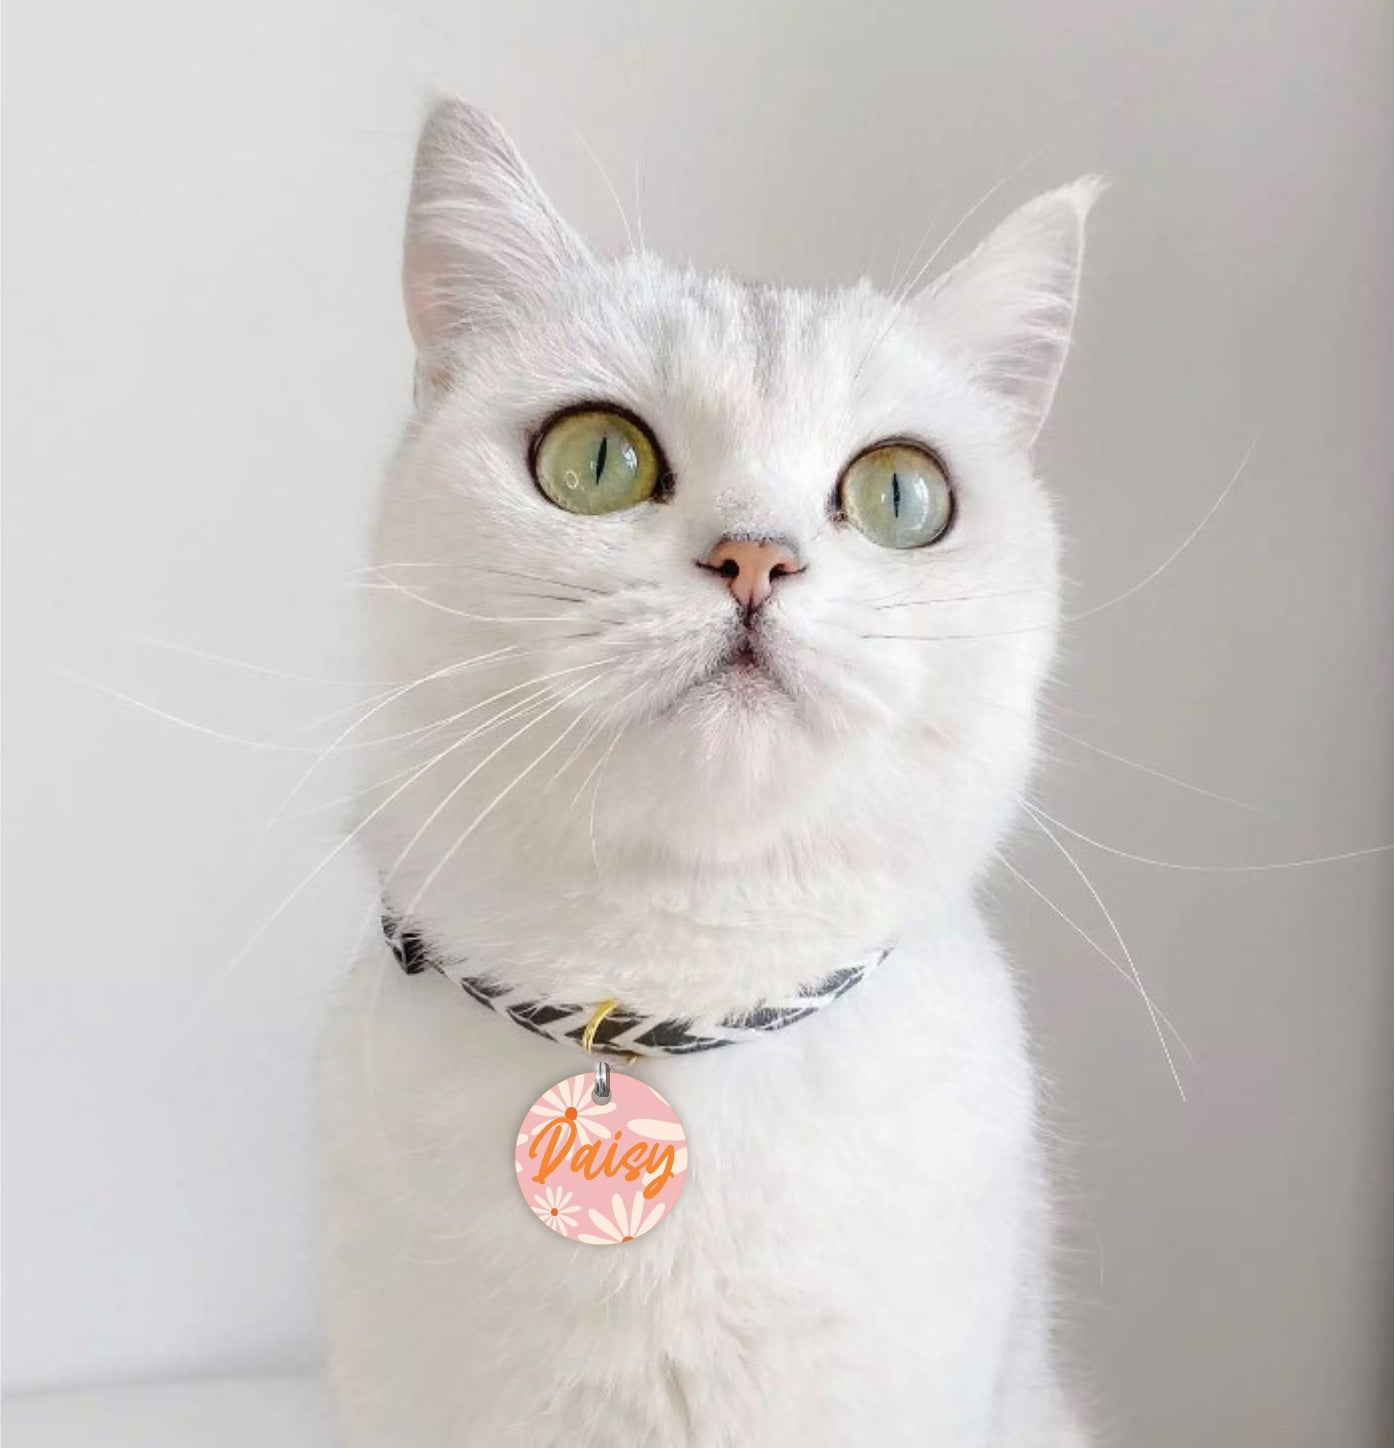 Small 25mm Flower Personalised Pet Cat ID Tag - Daisy